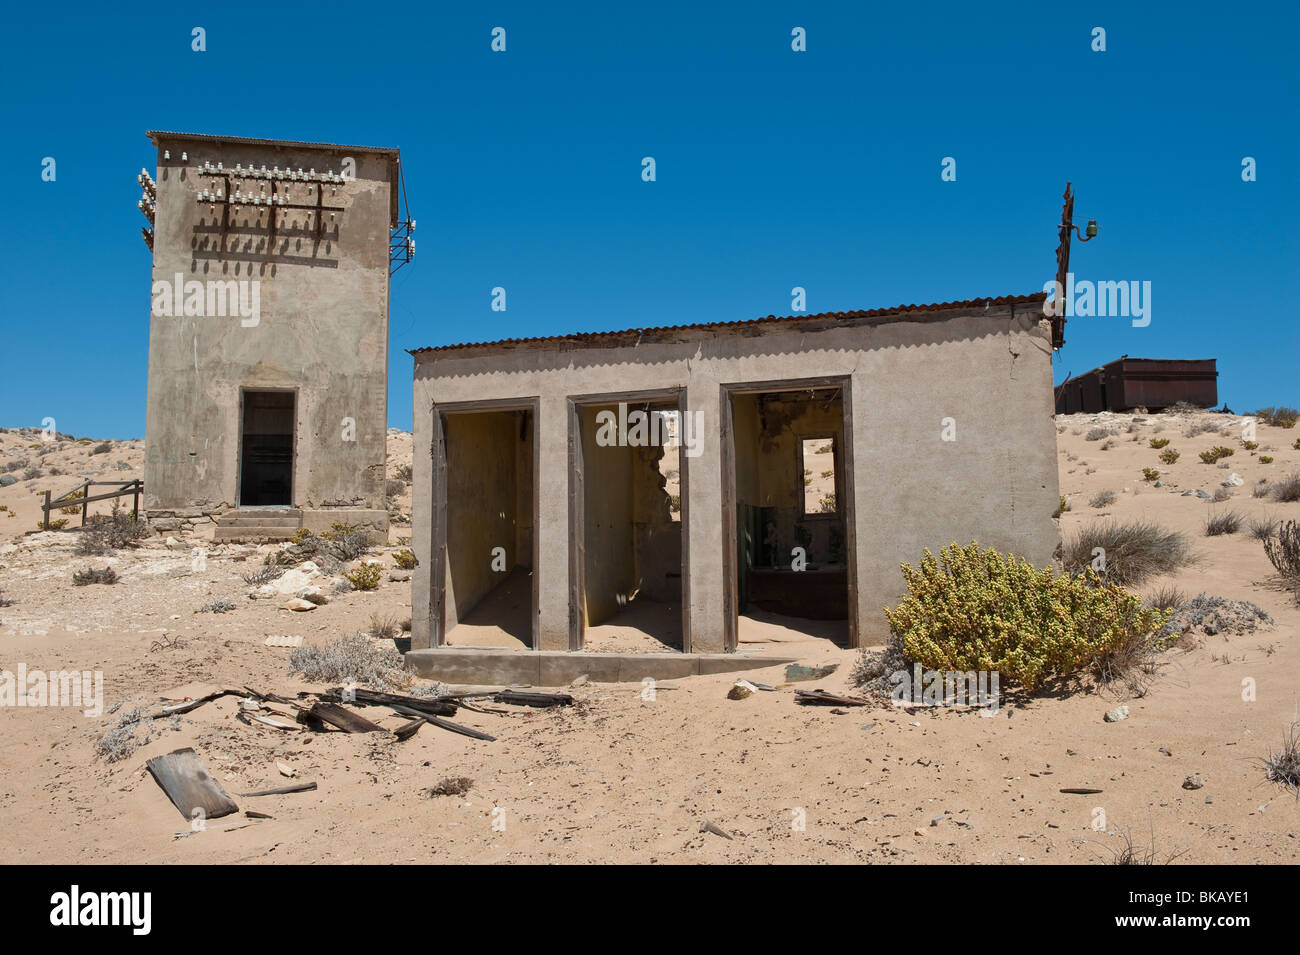 Derelict Toilet Block, Telephone Exchange and Communication Tower in Kolmanskop Ghost Town near Luderitz, Namibia Stock Photo